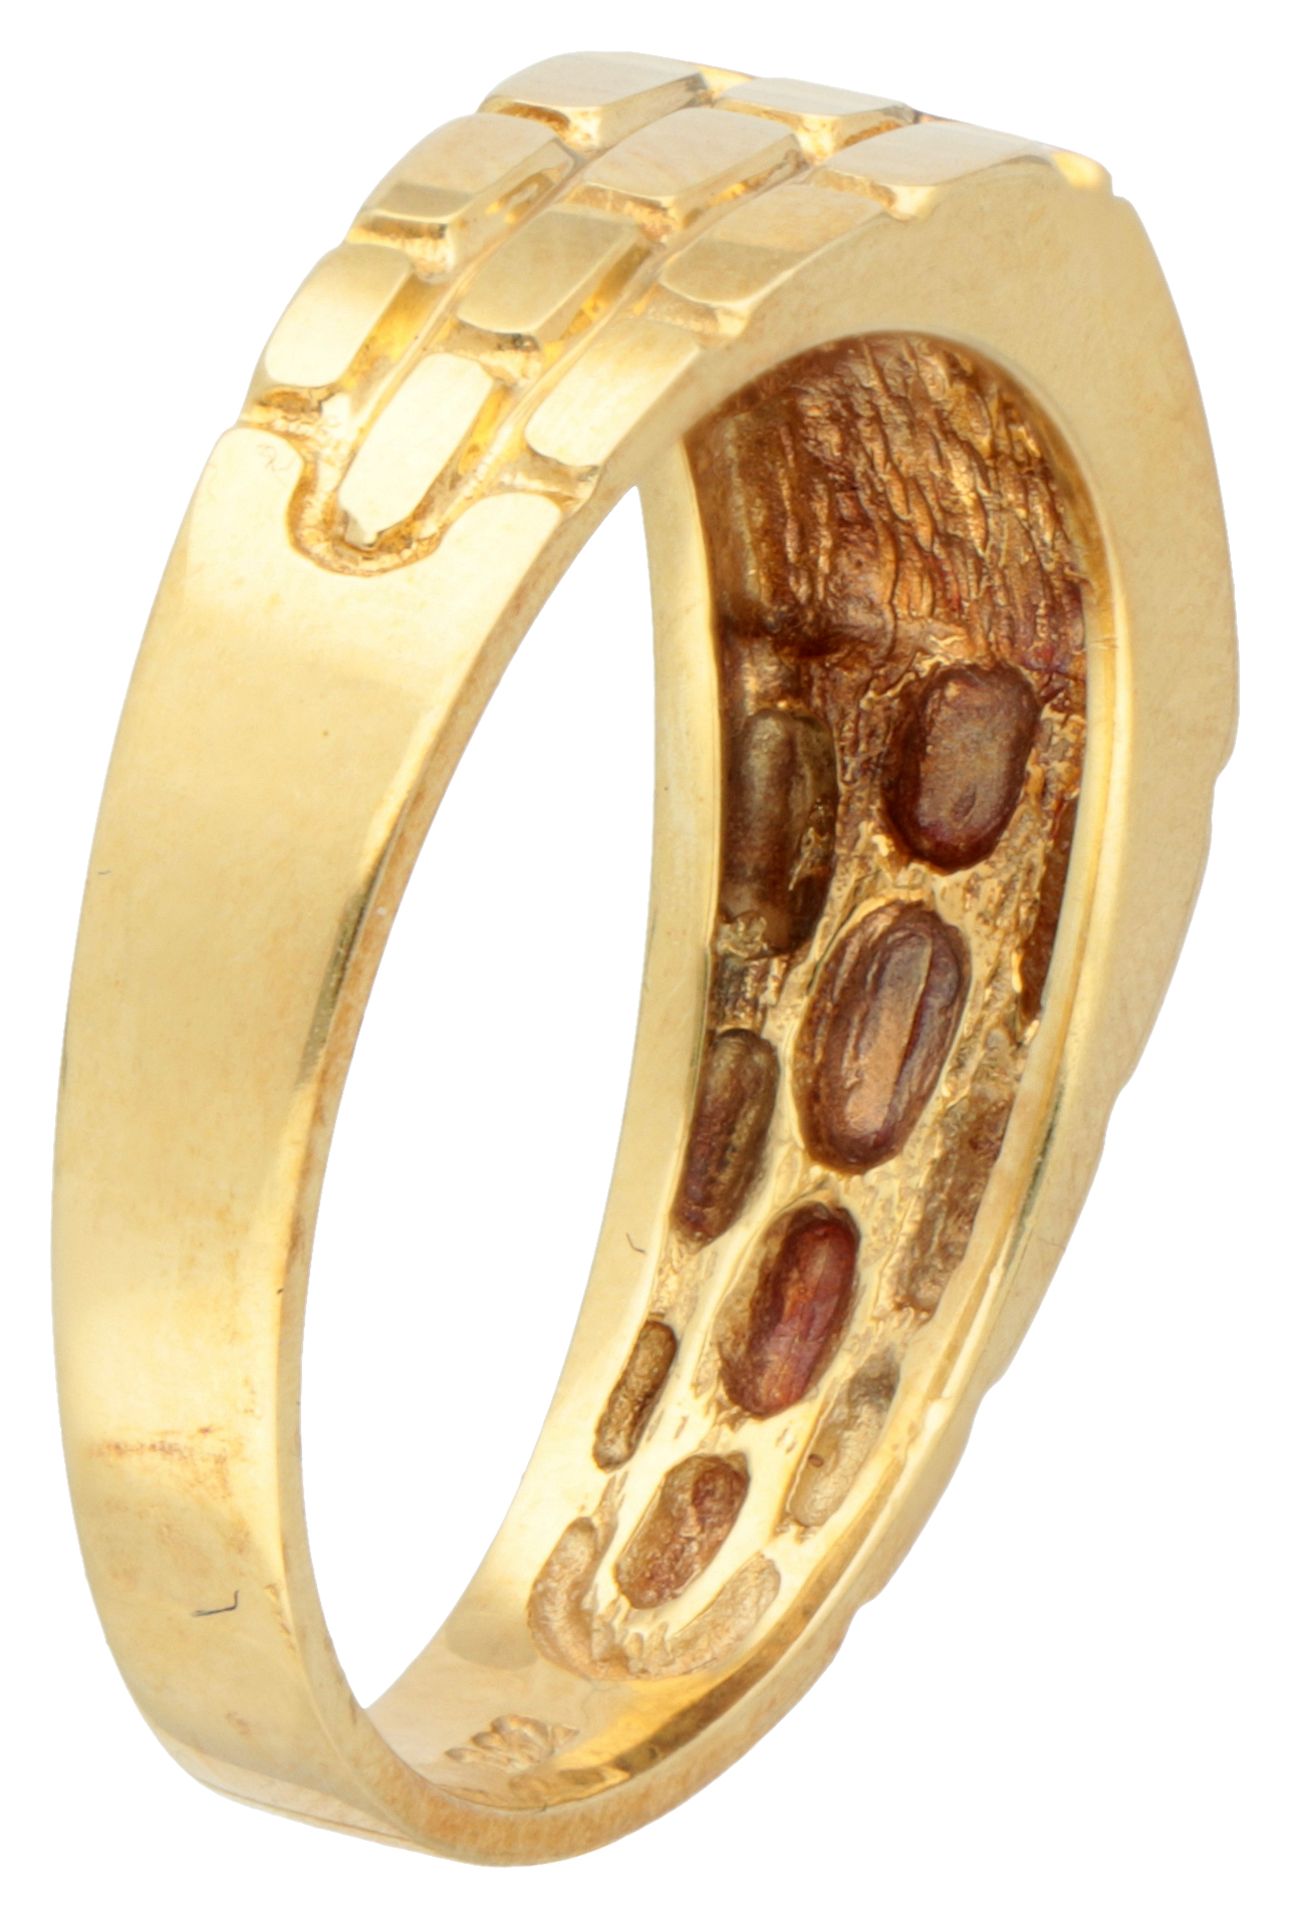 14K Bicolour gold men's ring set with approx. 0.02 ct diamond. - Image 2 of 4